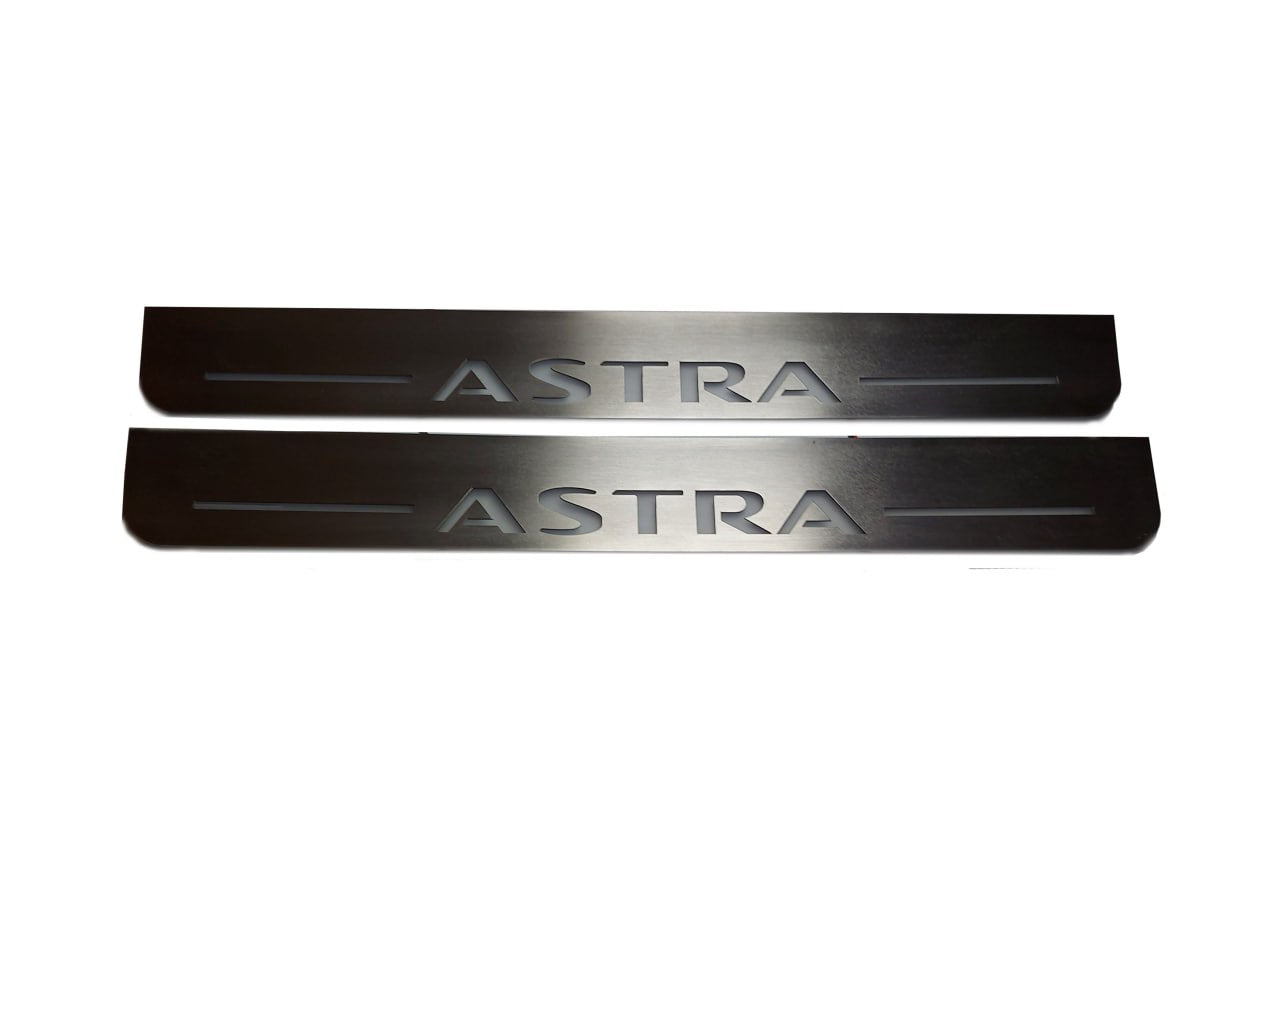 Opel Astra H LED Door Sills PRO With Logo Astra - decoinfabric